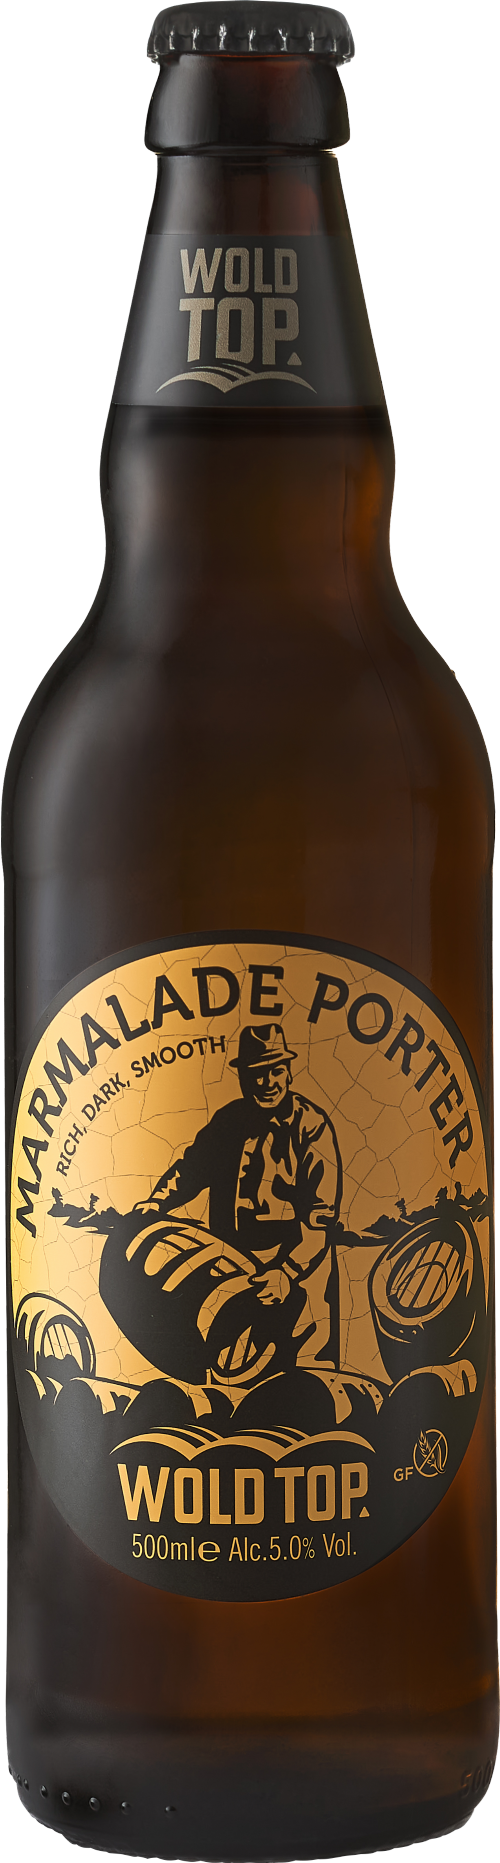 WOLD TOP Marmalade Porter 5.0% ABV 500ml